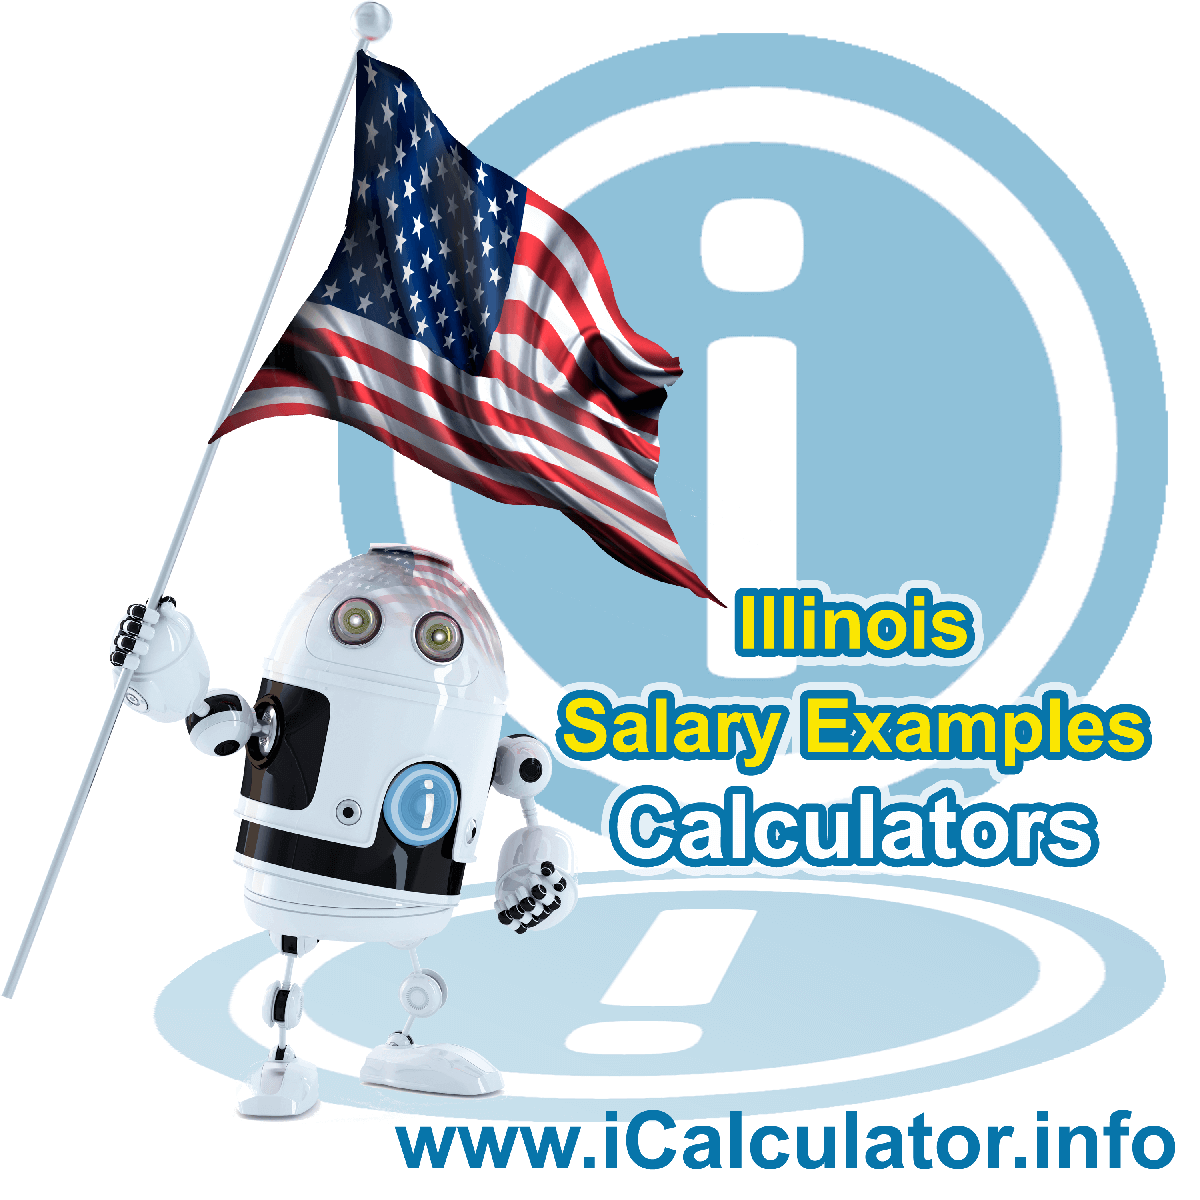 Illinois Salary Example for $ 120,000.00 in 2023 | iCalculator™ | $ 120,000.00 salary example for employee and employer paying Illinois State tincome taxes. Detailed salary after tax calculation including Illinois State Tax, Federal State Tax, Medicare Deductions, Social Security, Capital Gains and other income tax and salary deductions complete with supporting Illinois state tax tables 